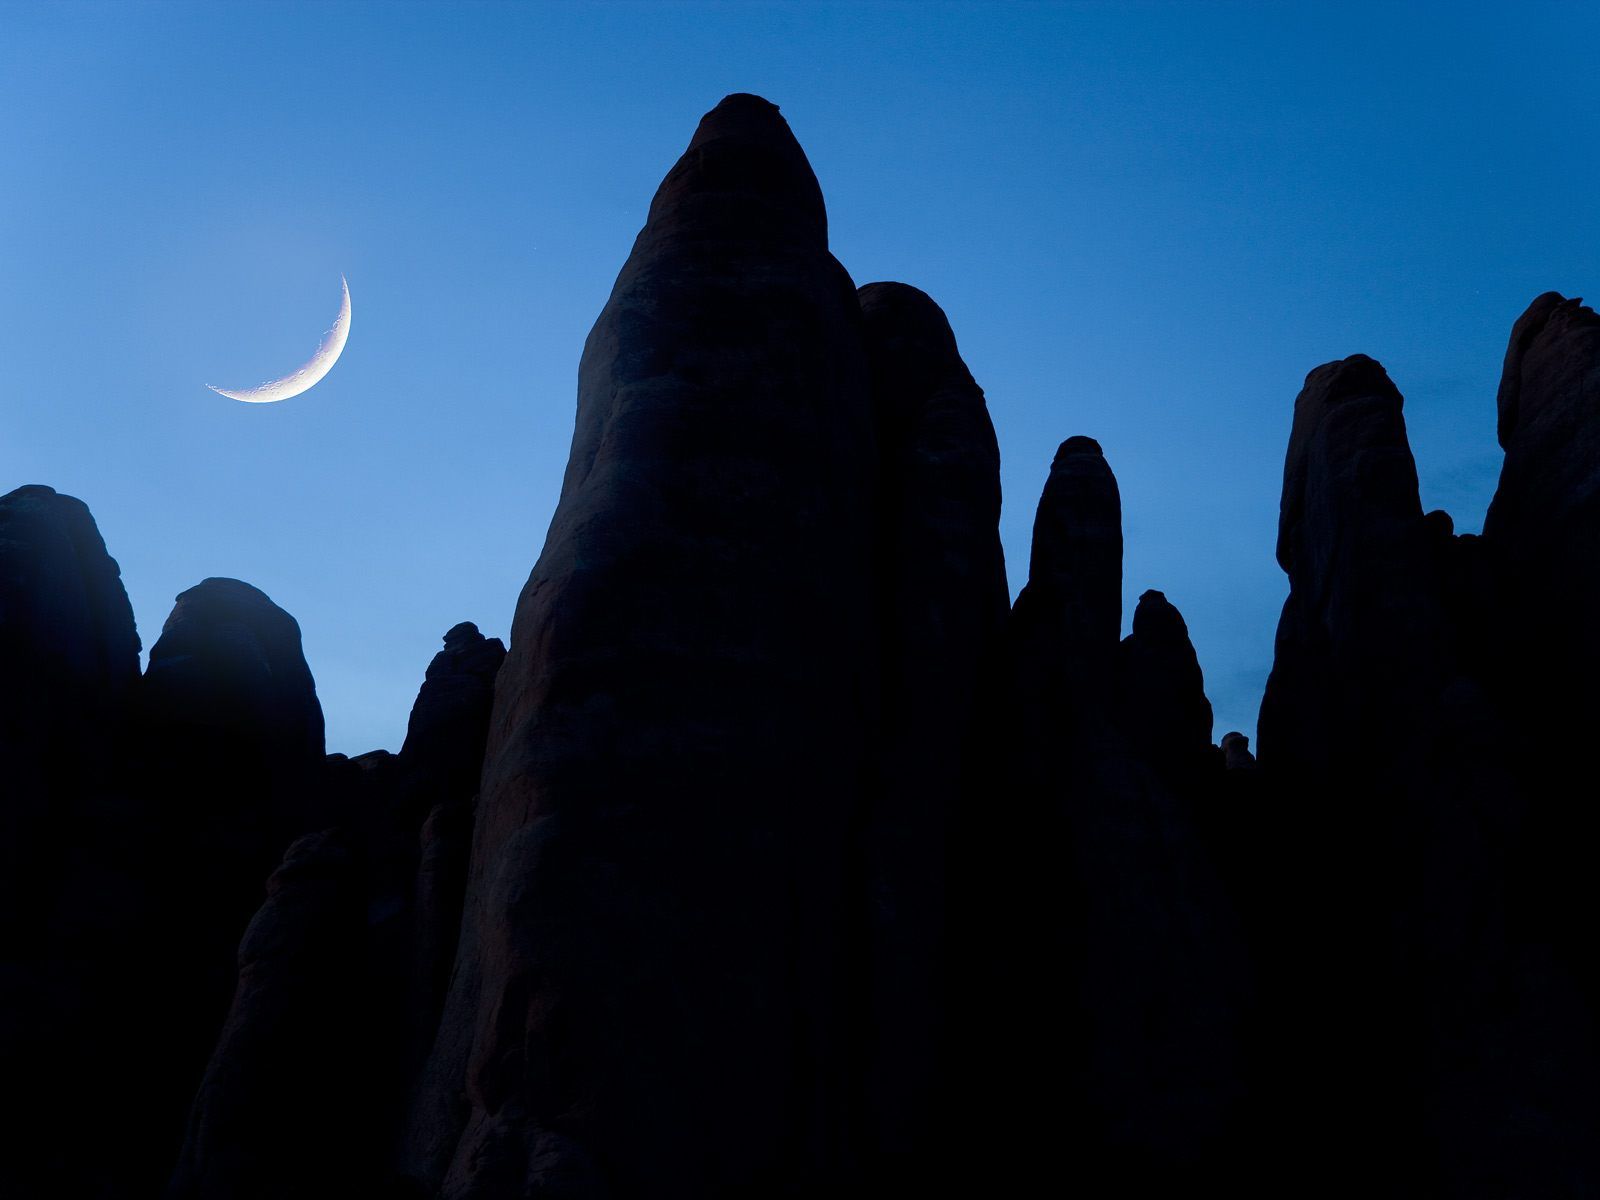 Arches National Park - HD Wallpaper 